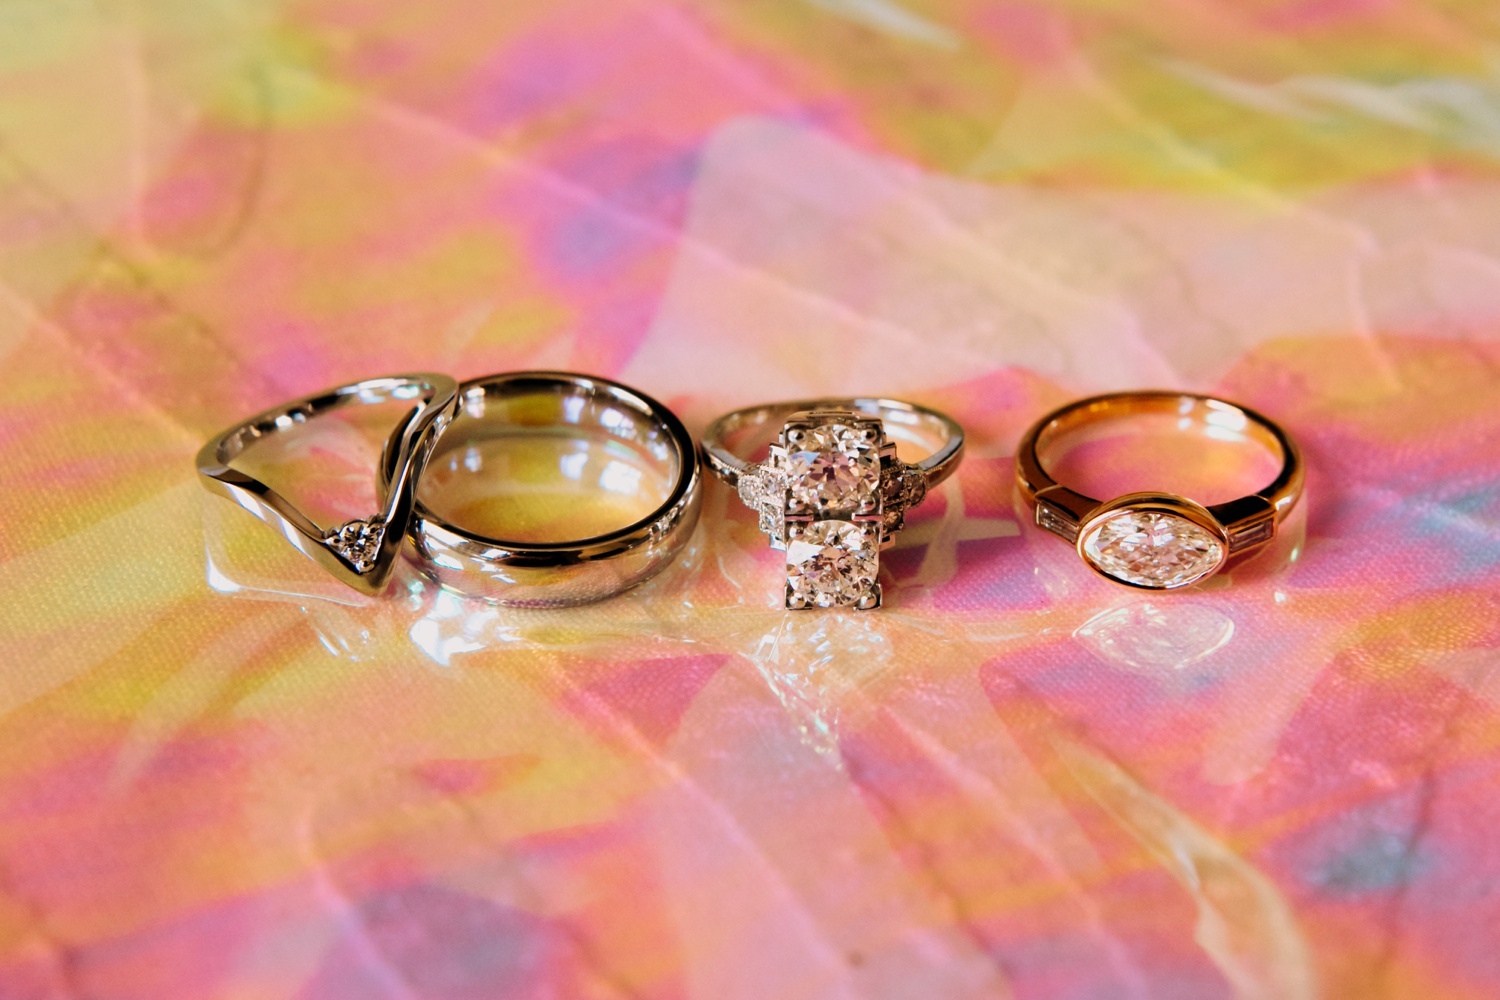 Rings on top of an iridescent background